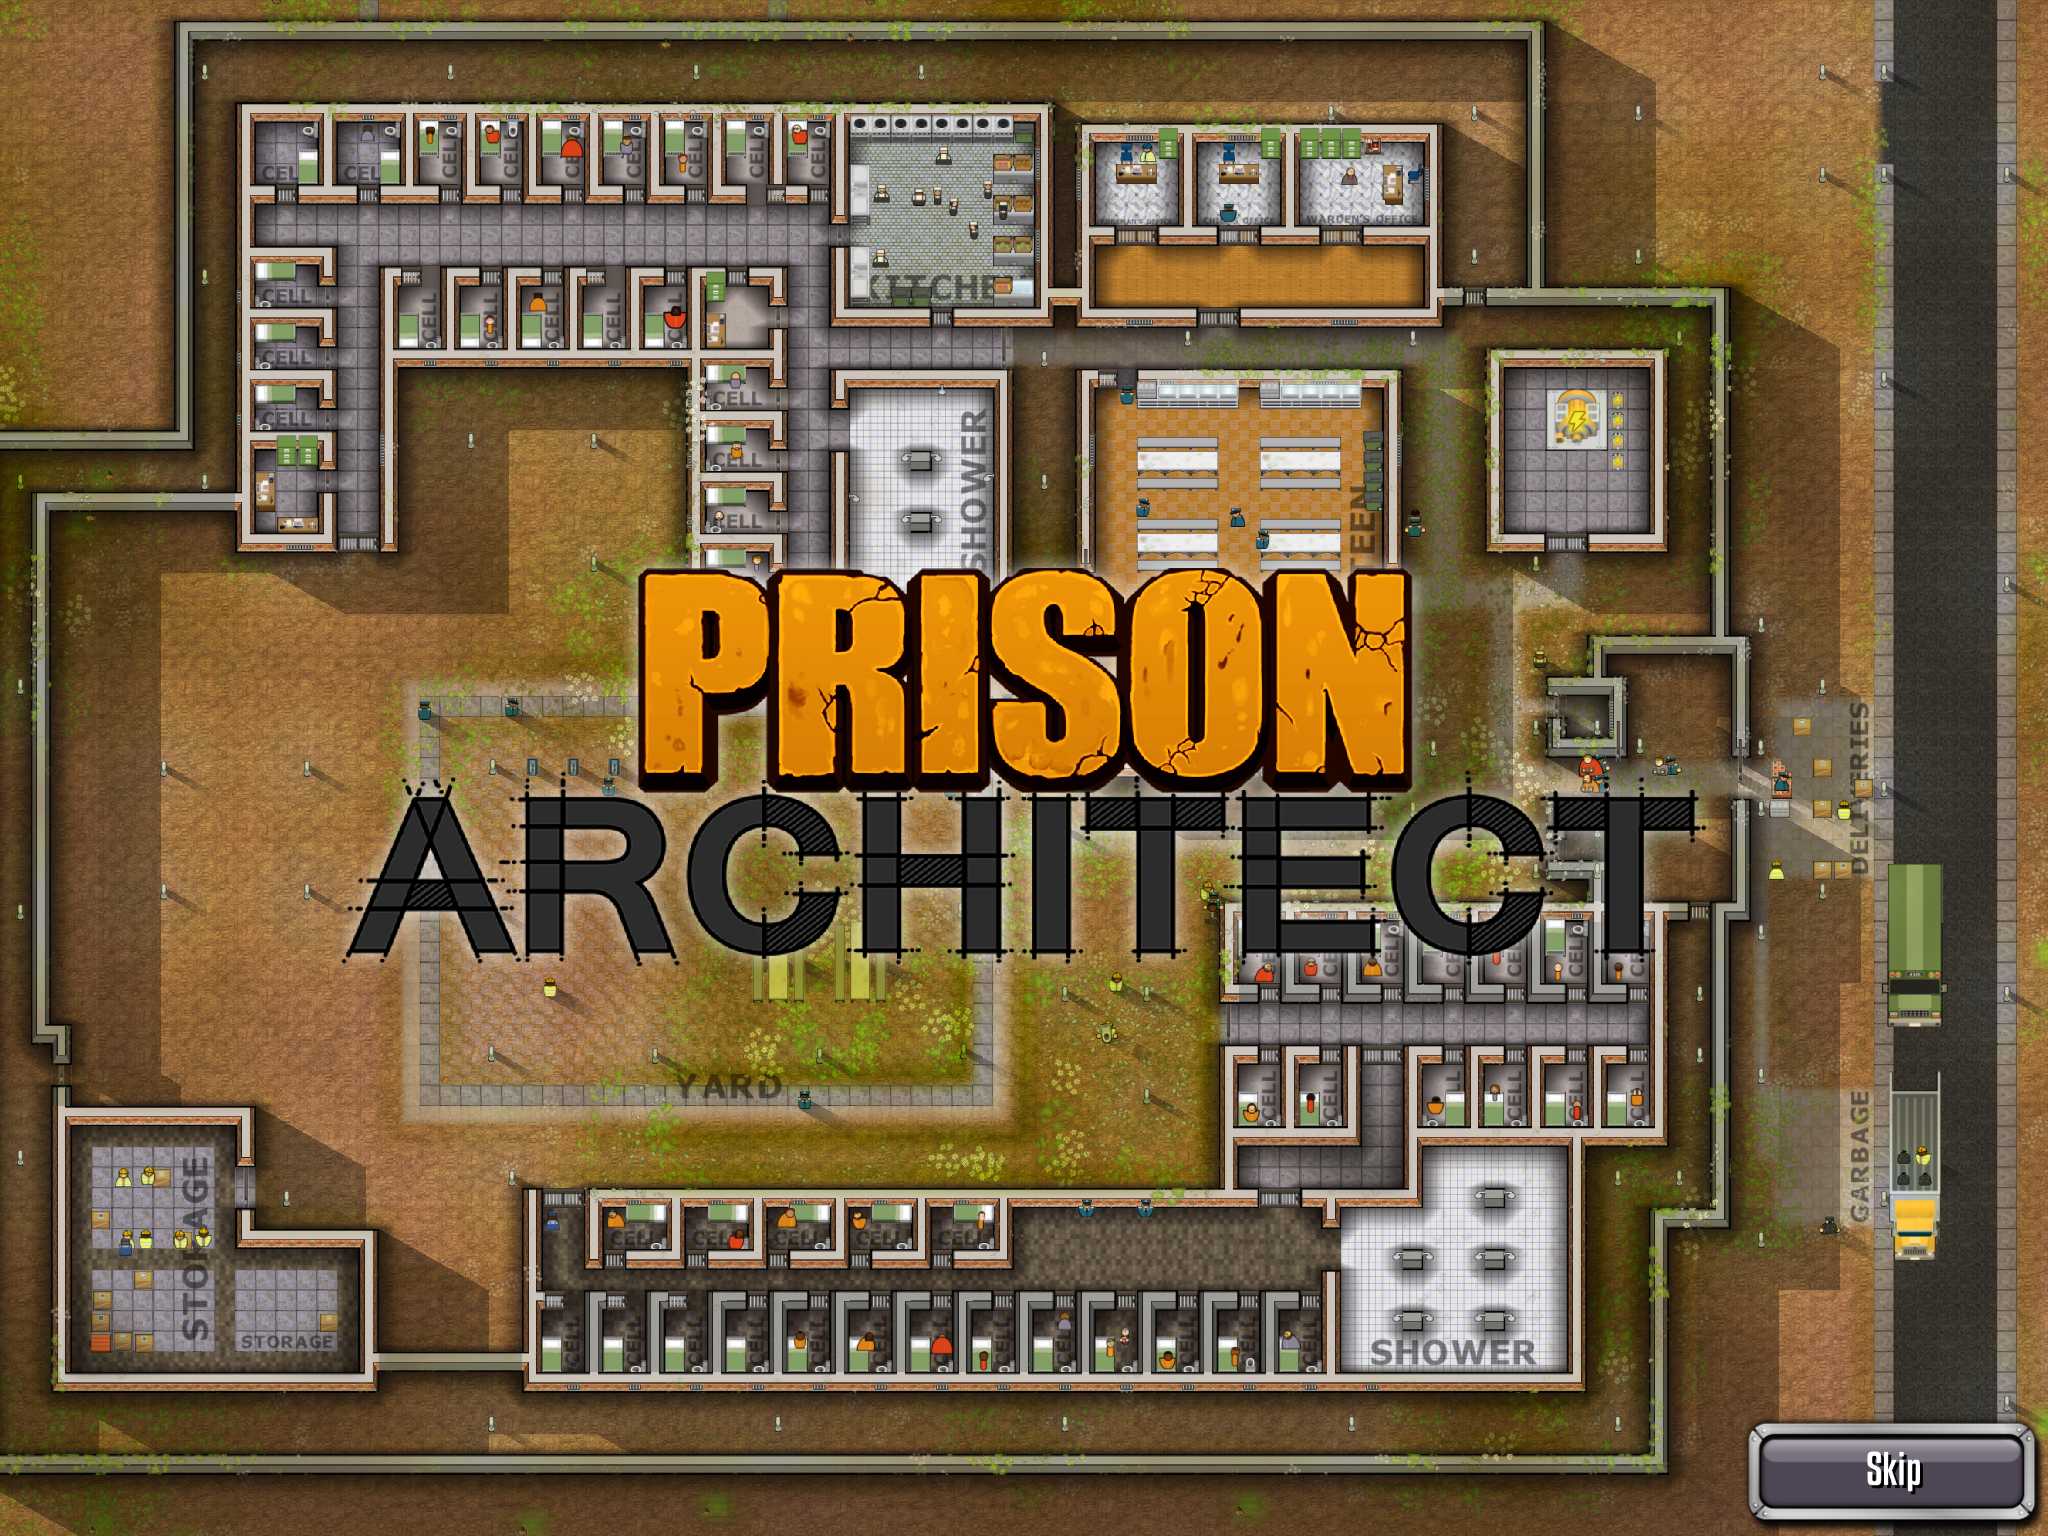 'Prison Architect' Review - Running a Prison Shouldn't be This Fun